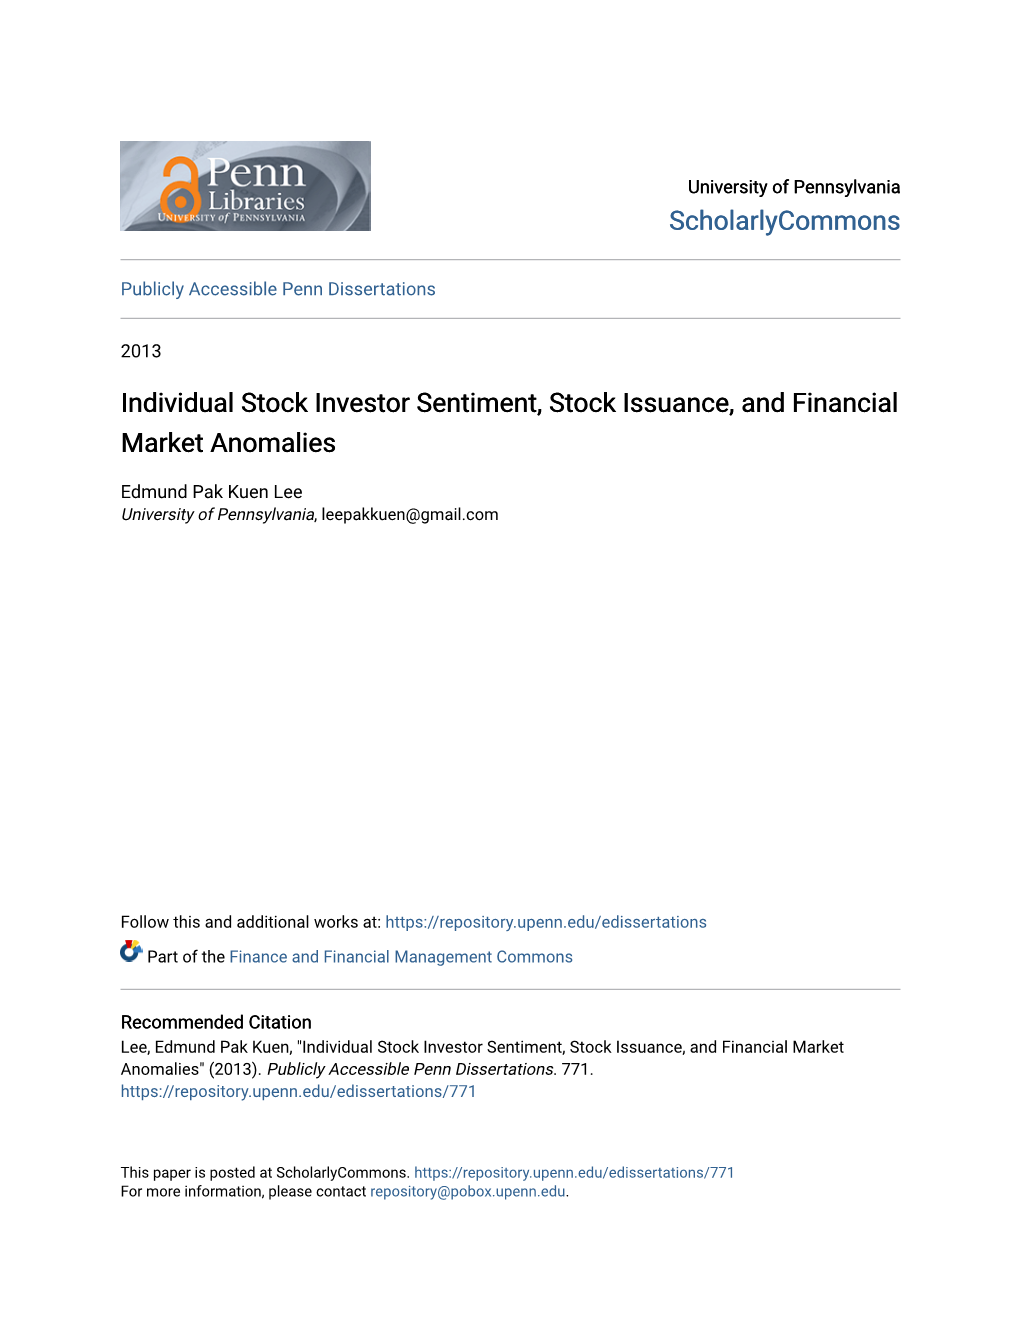 Individual Stock Investor Sentiment, Stock Issuance, and Financial Market Anomalies